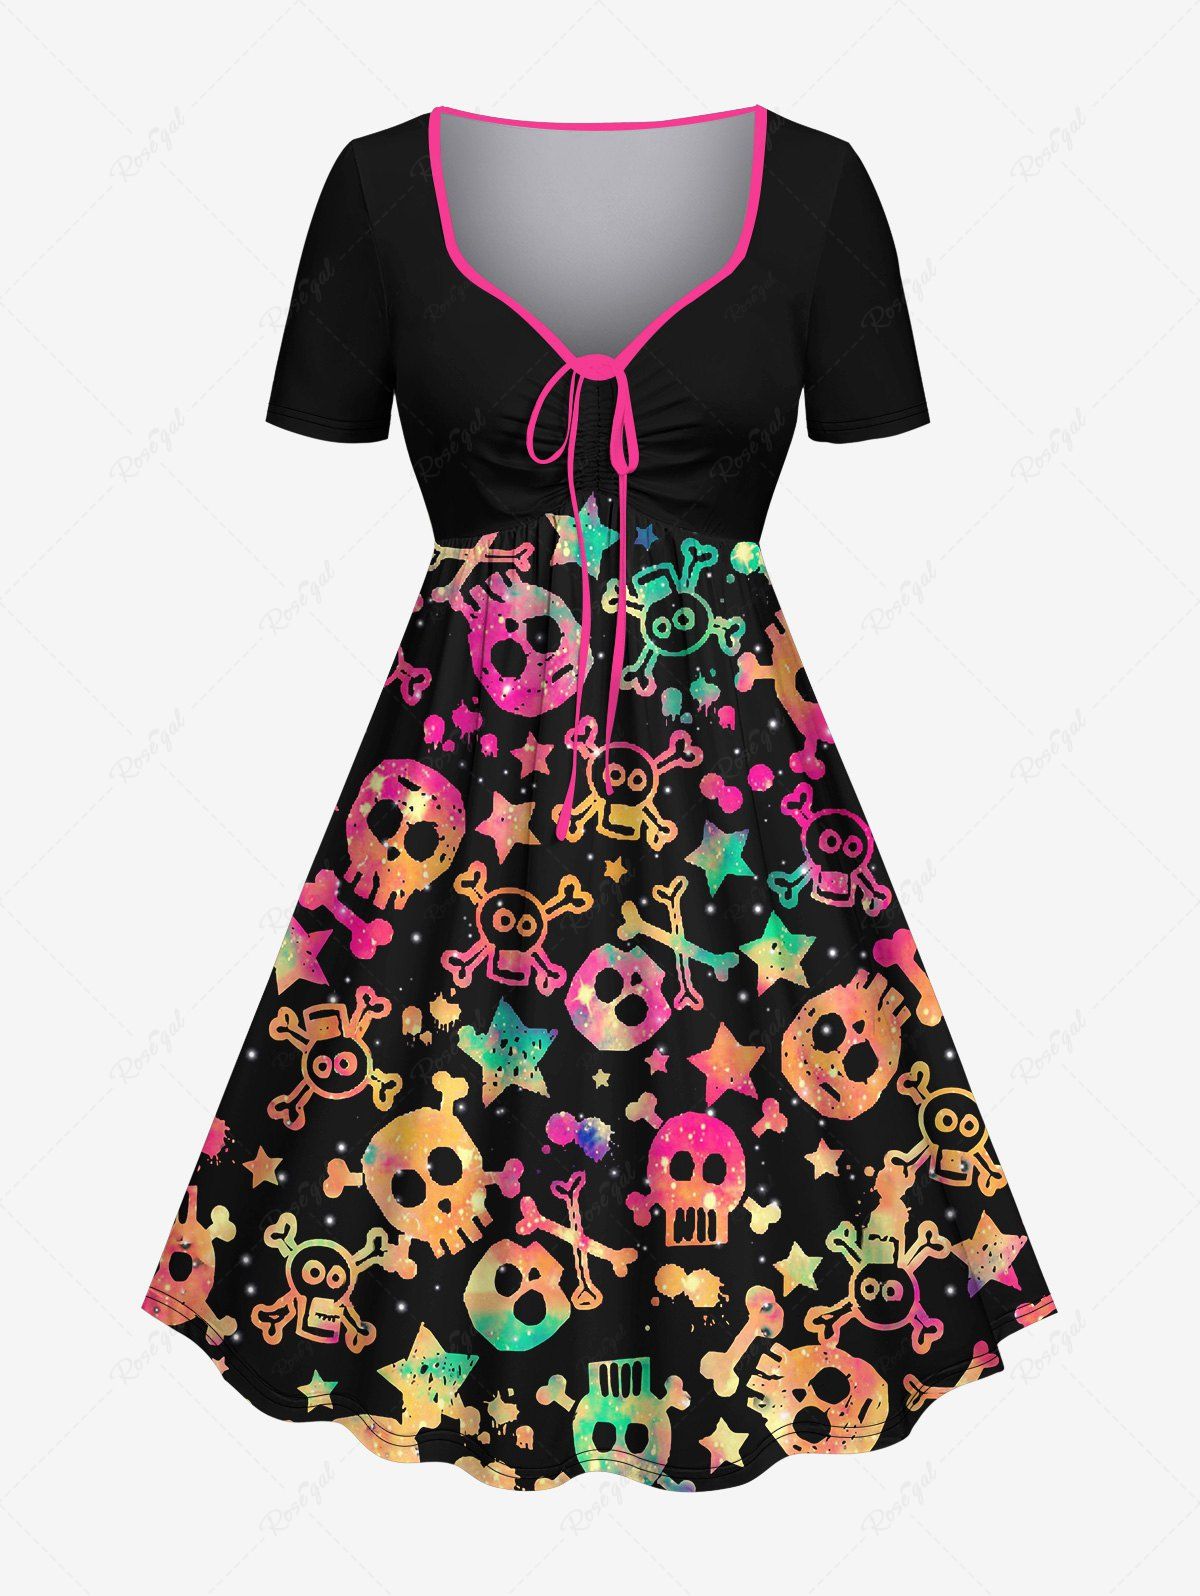 Store Plus Size Halloween Costume Skull Star Print Cinched Dress  